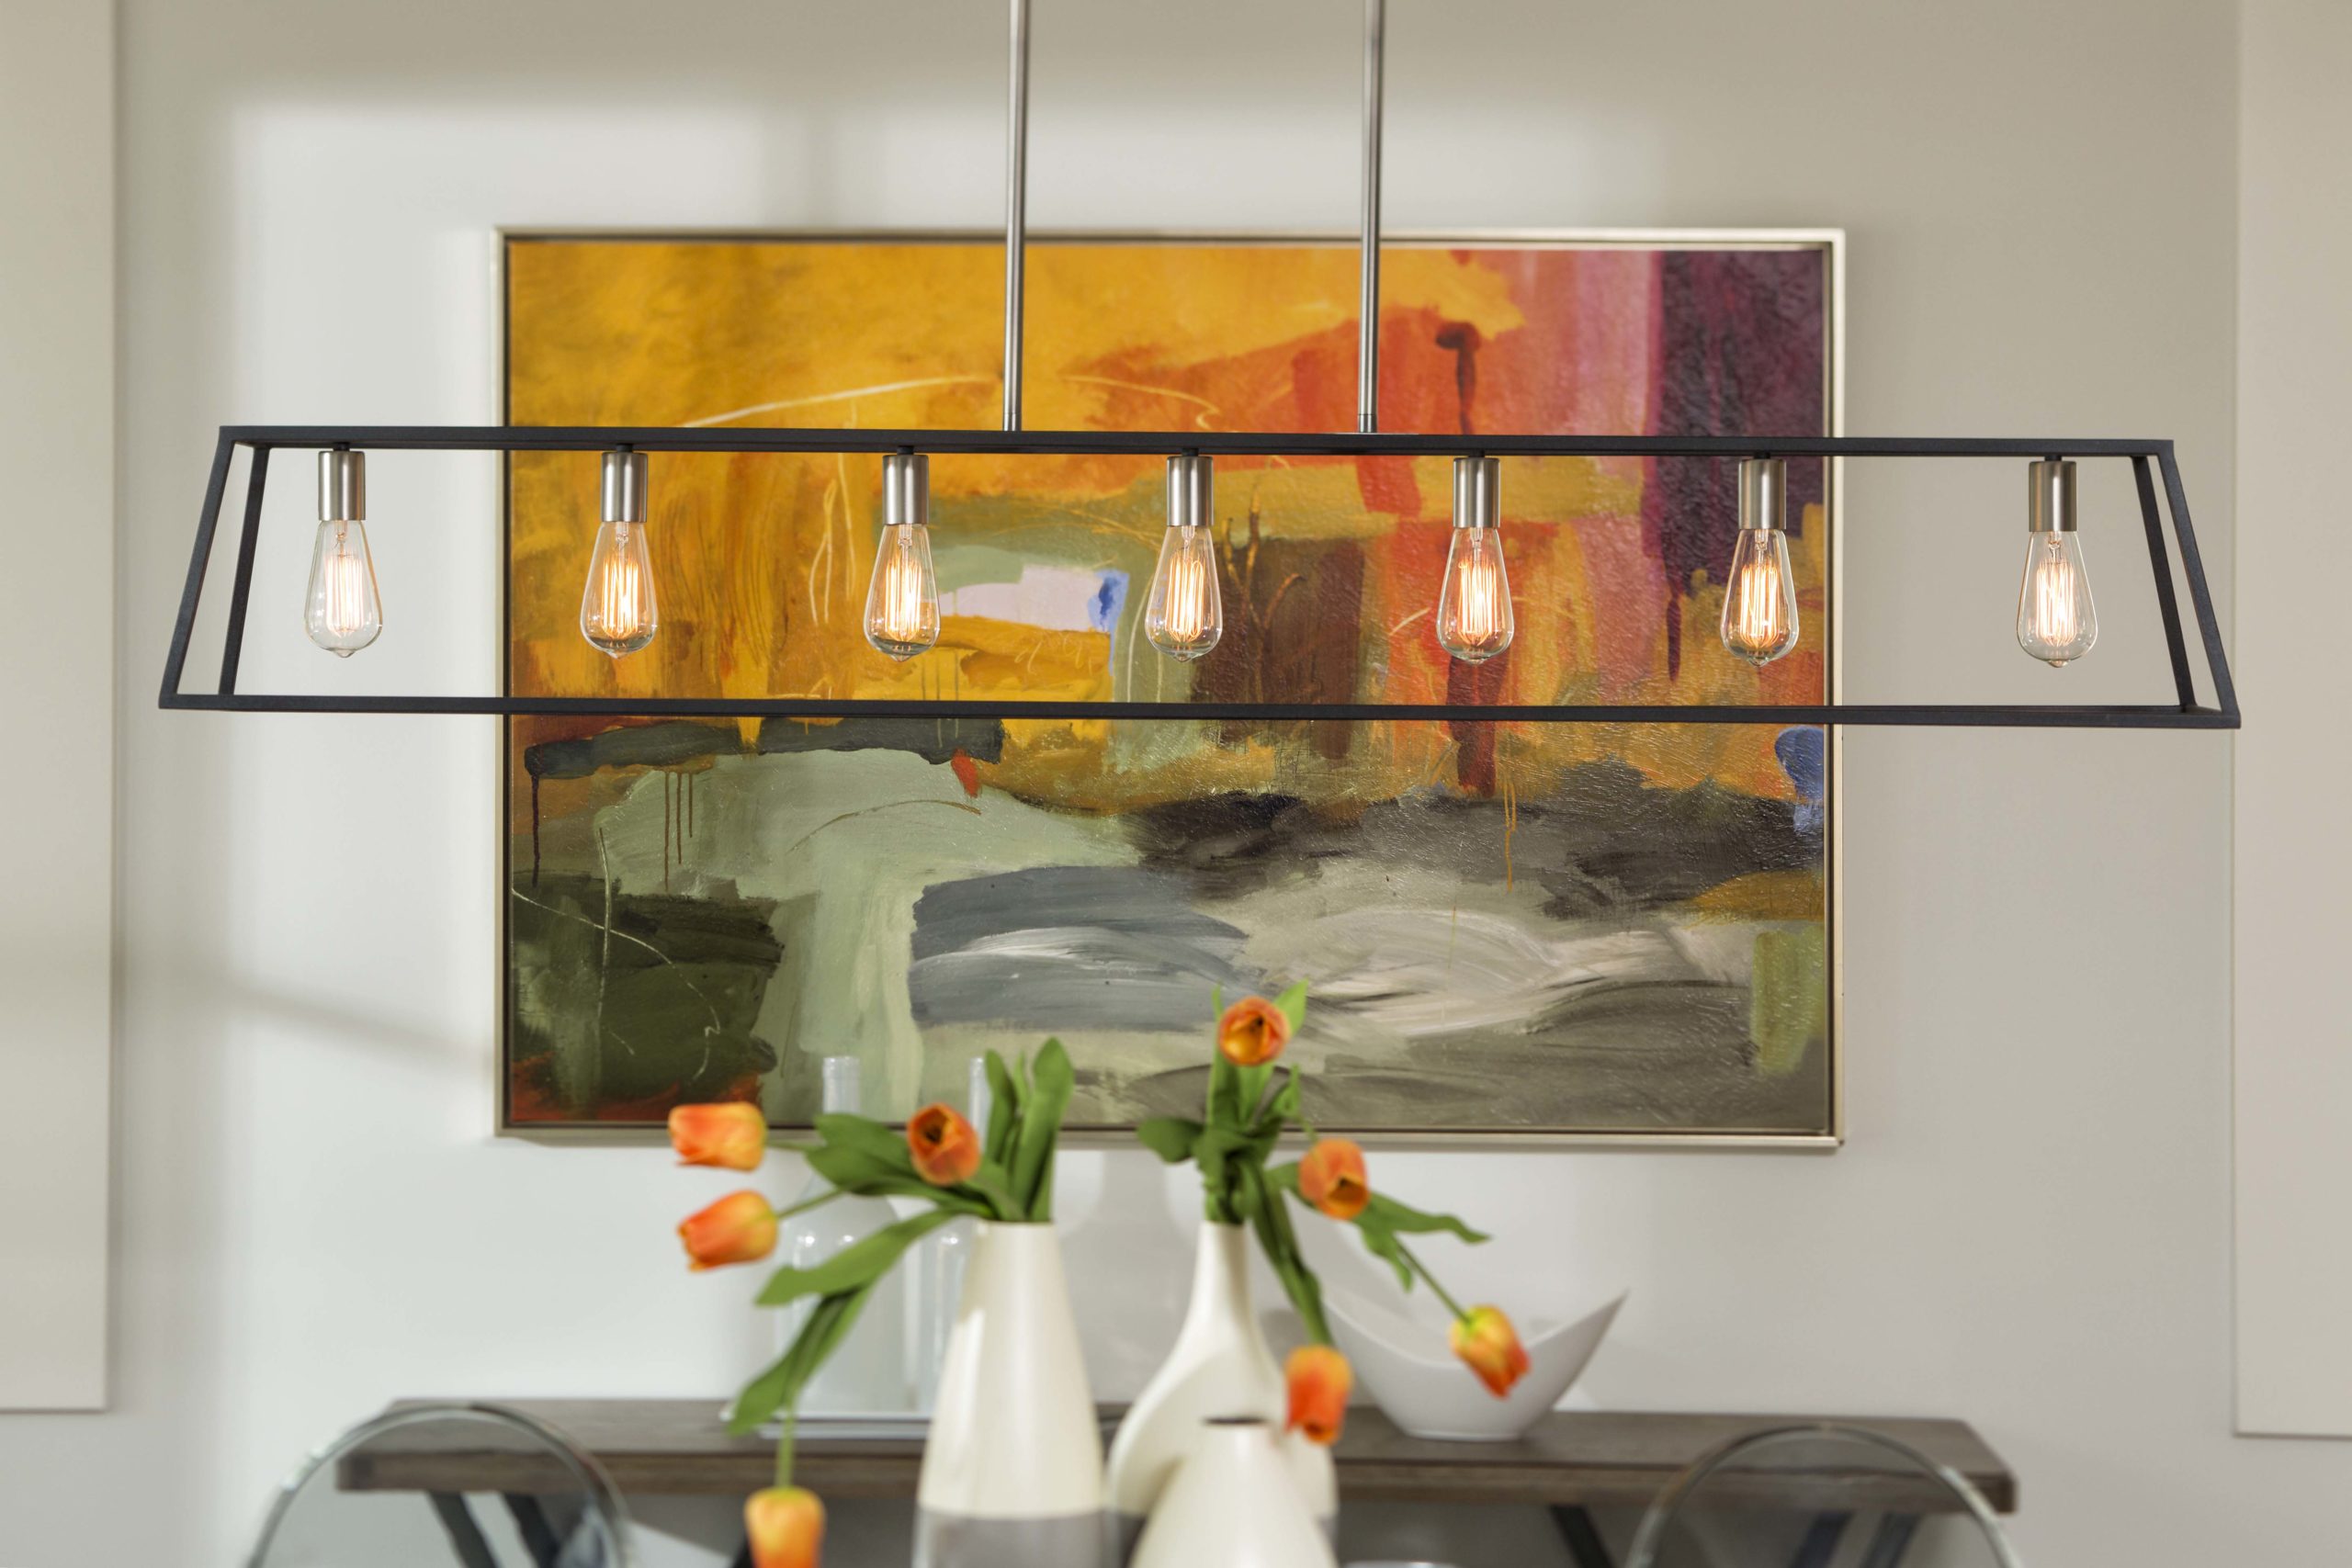 Variety of dining room accessories including modern light fixture, bright orange and green painting with flowers is vases to match.